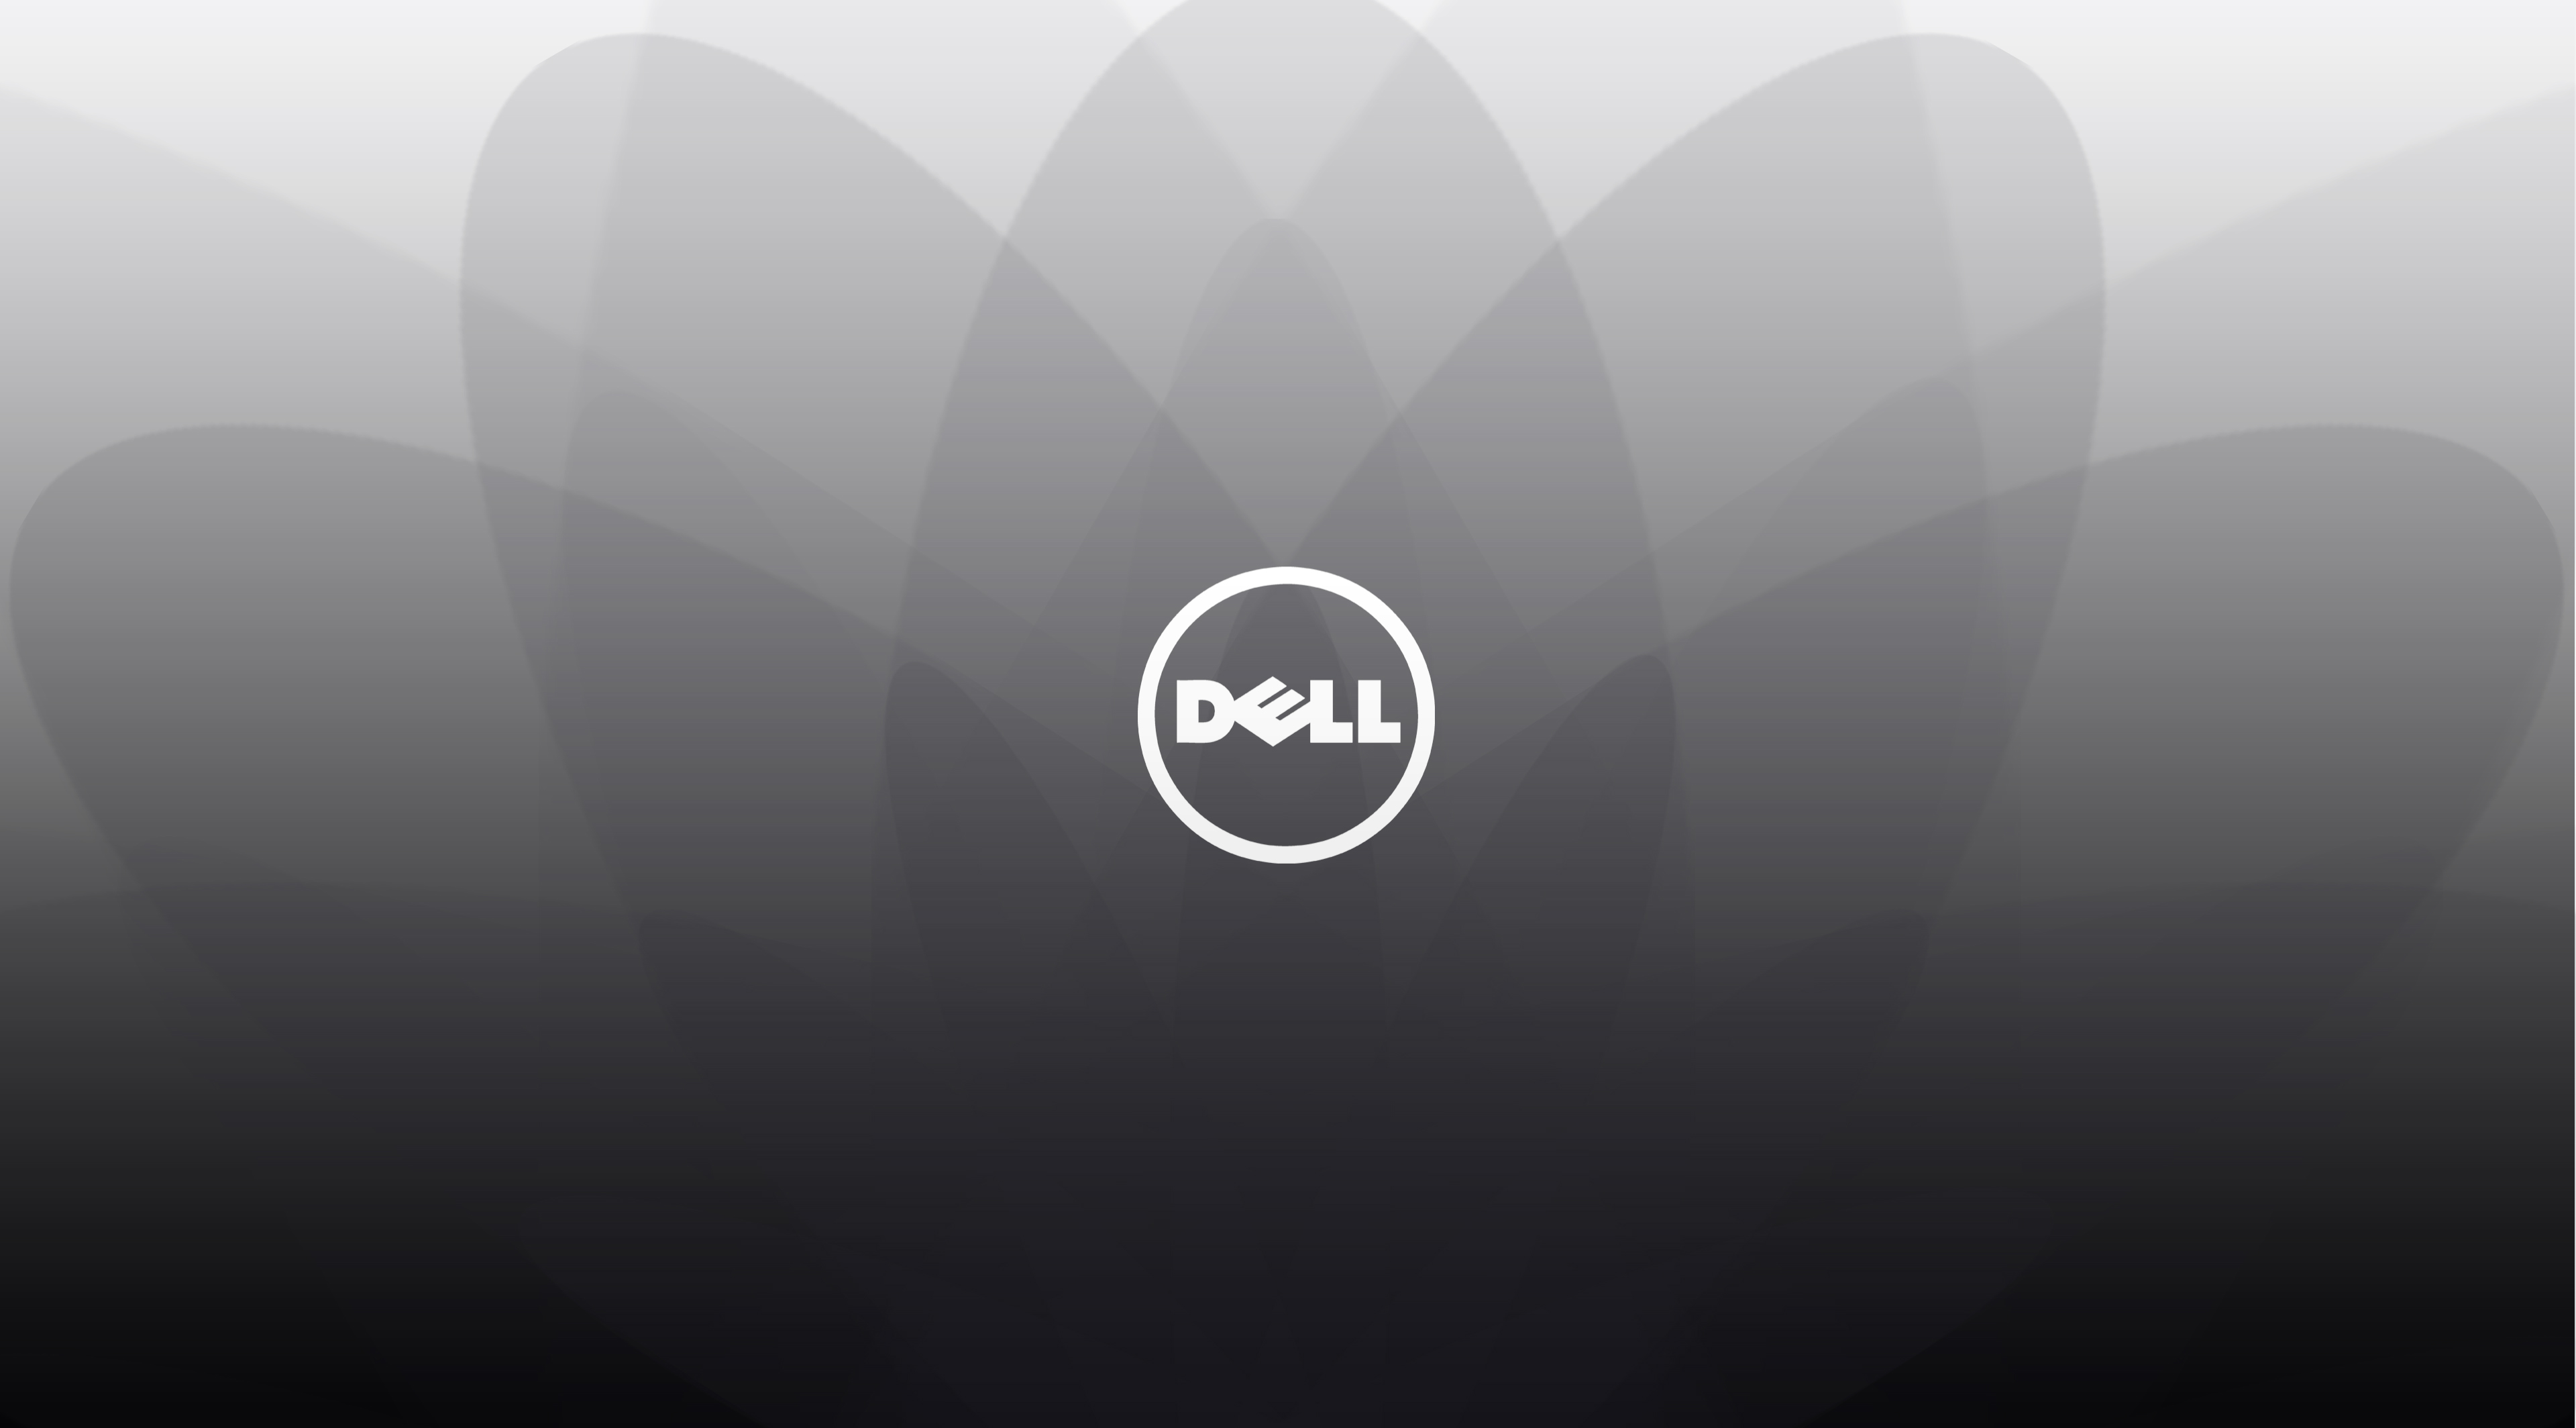 Hd Dell Wallpapers